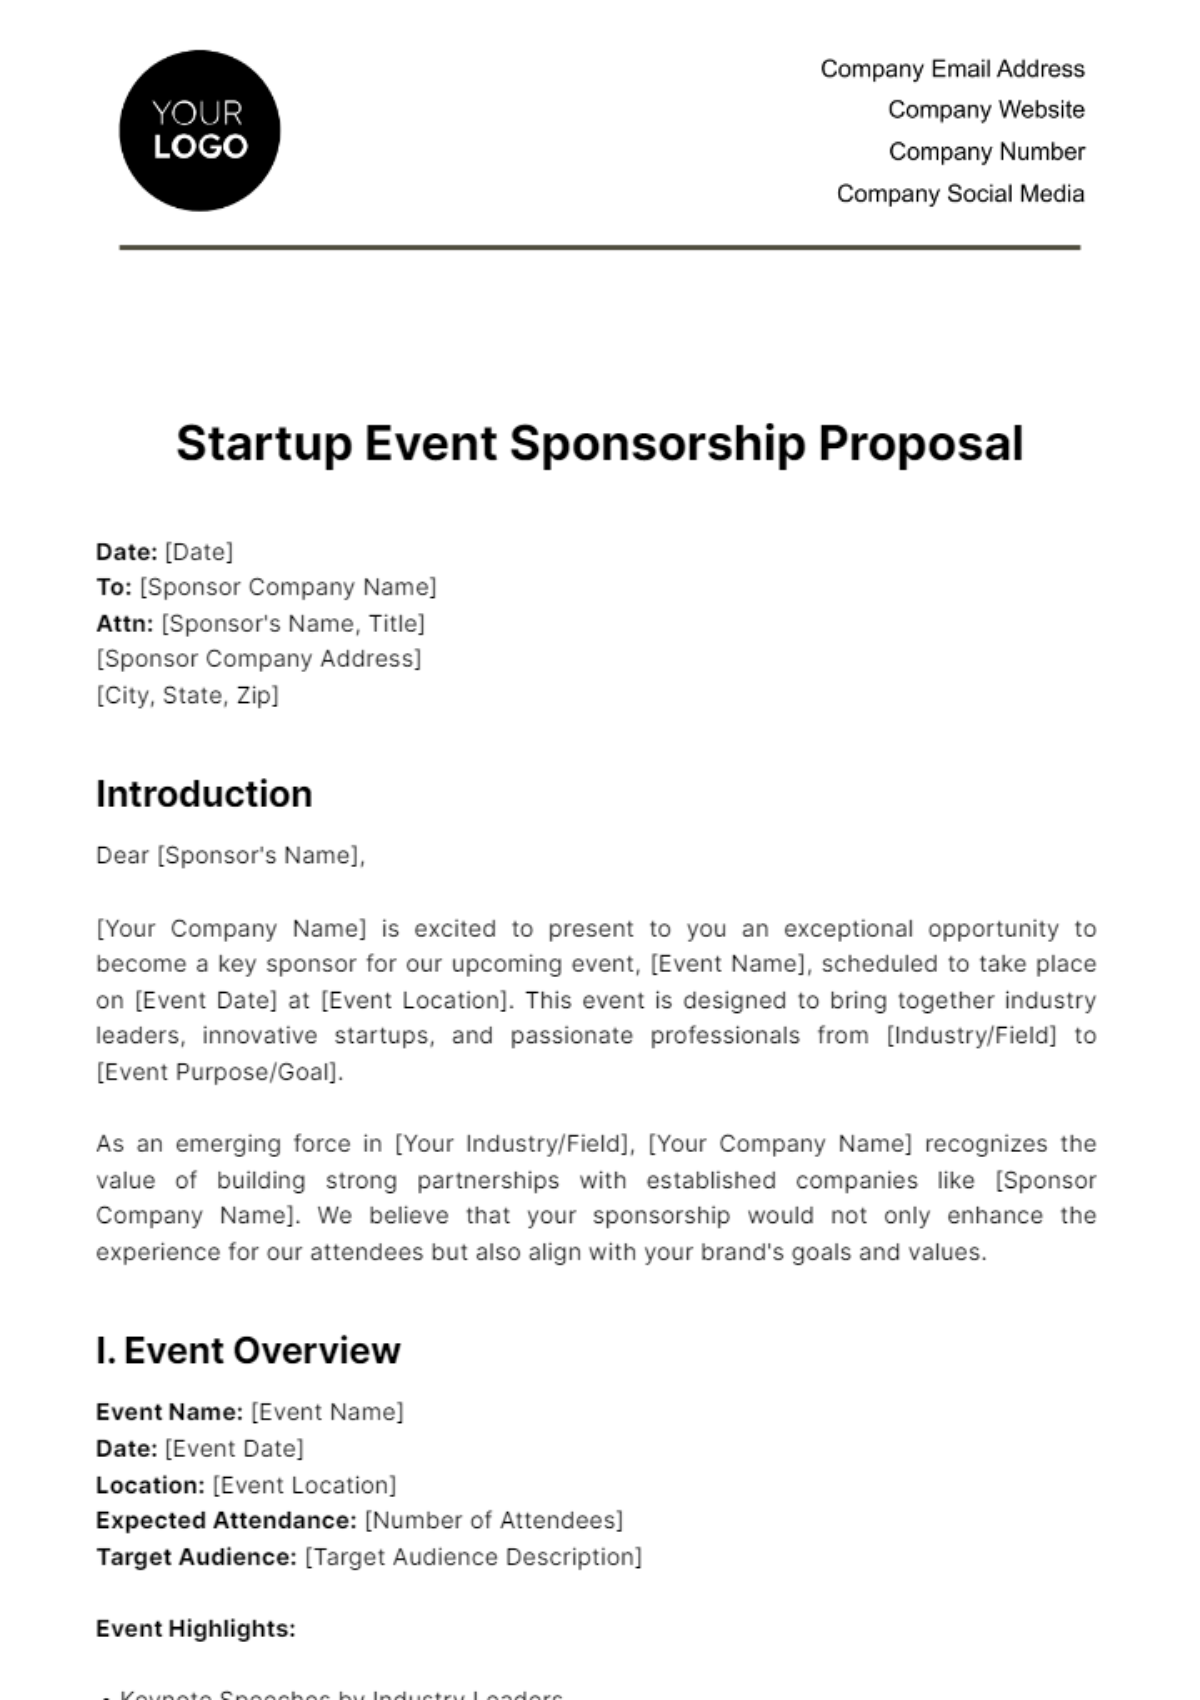 Free Startup Event Sponsorship Proposal Template